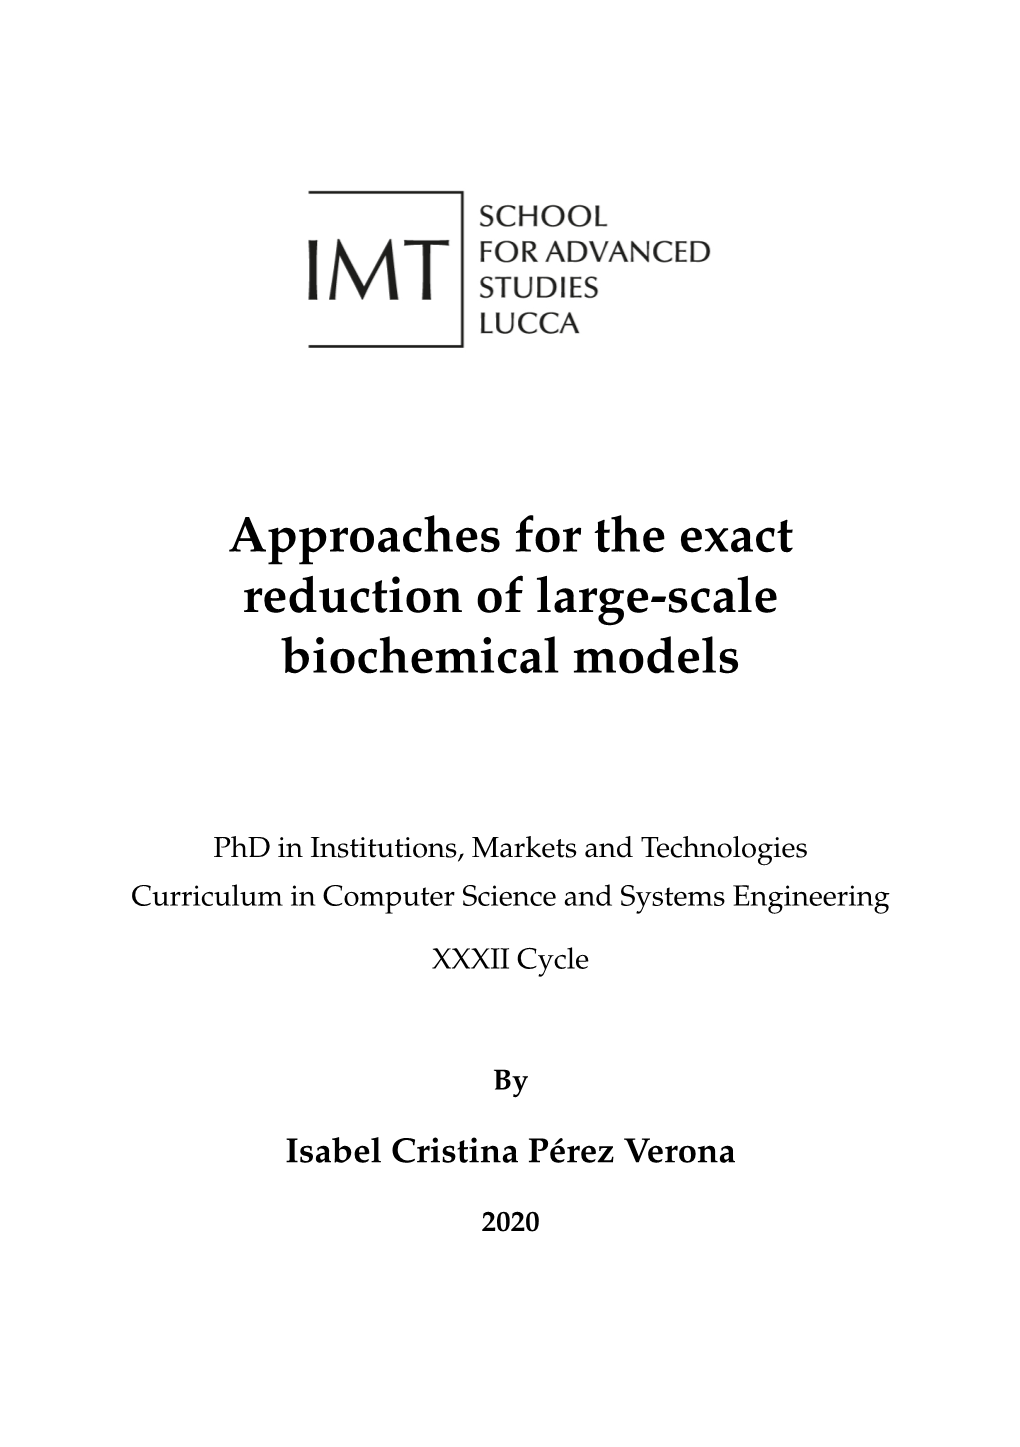 Approaches for the Exact Reduction of Large-Scale Biochemical Systems